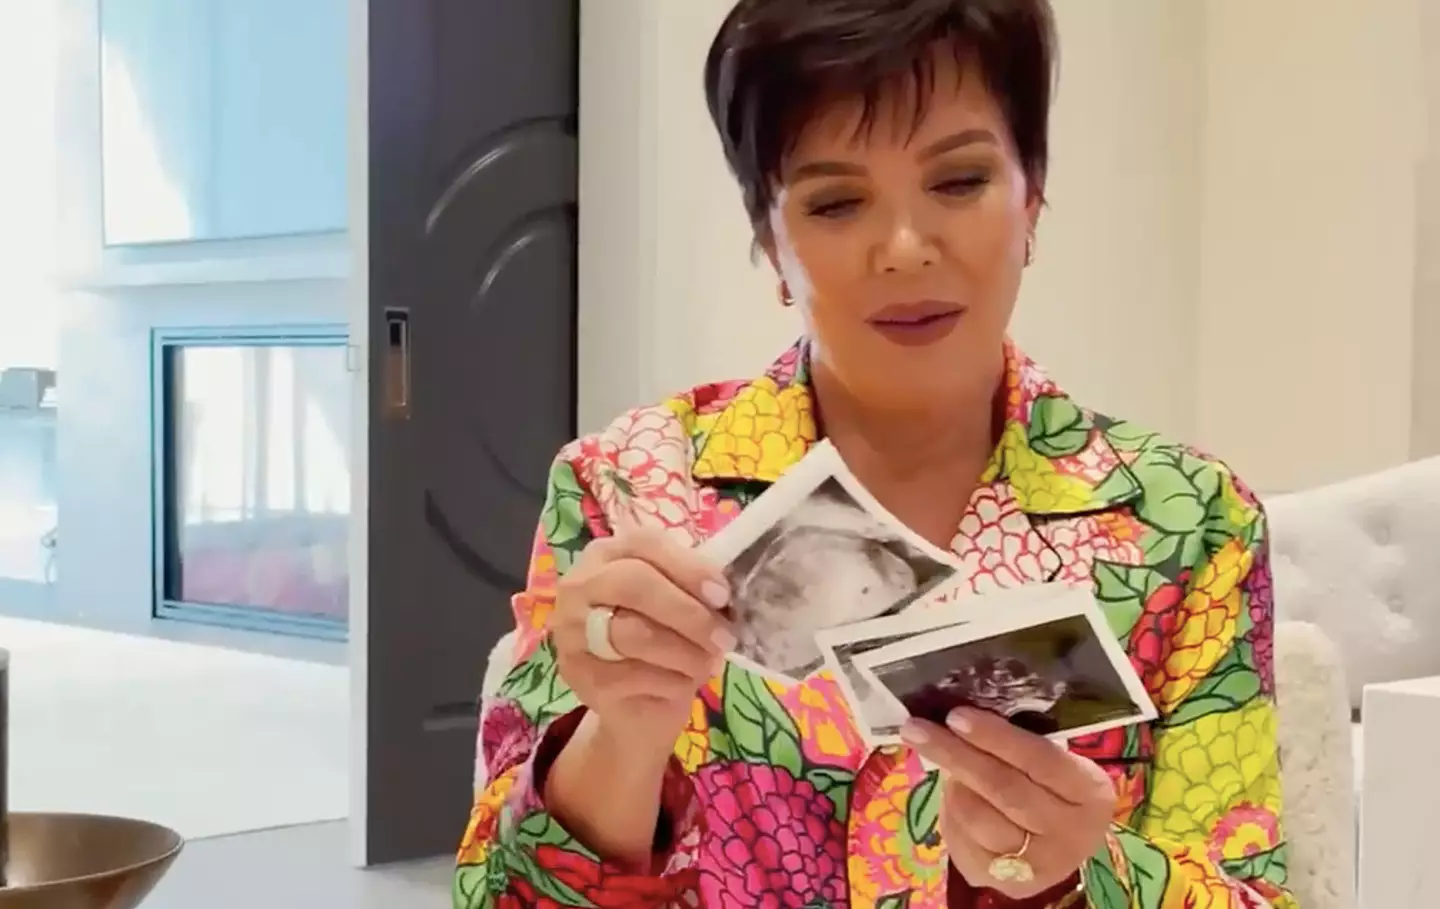 The cute clip goes on to show Stormi handing Kris an envelope filled with scan photos (